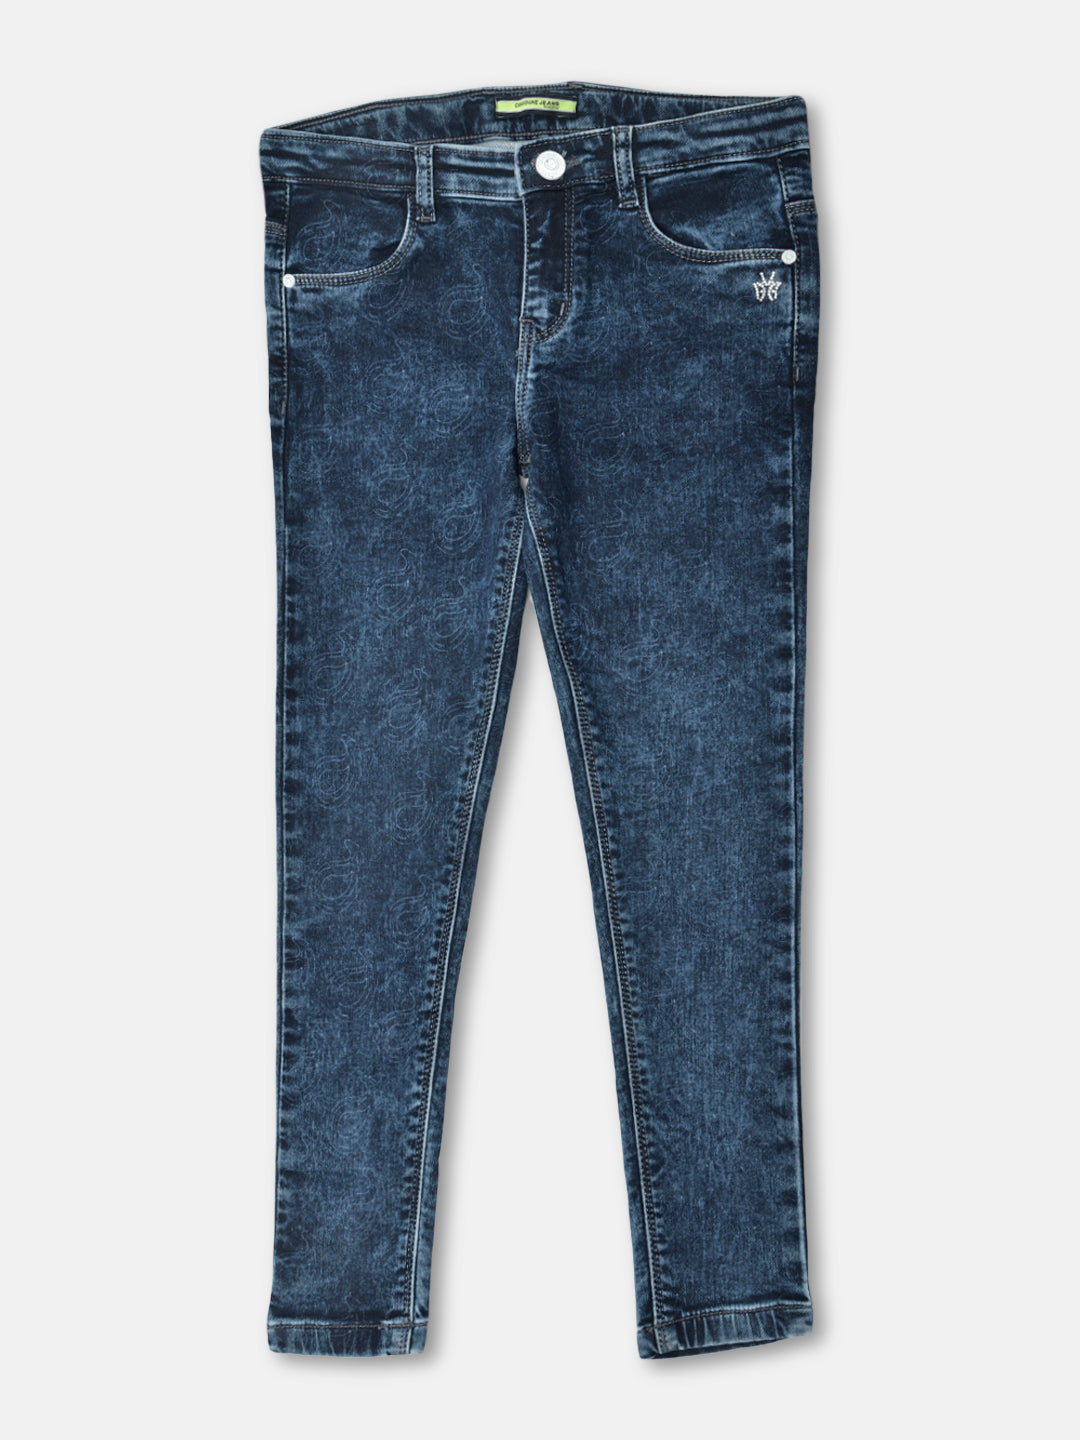 Blue Printed Jeans - Girls Jeans